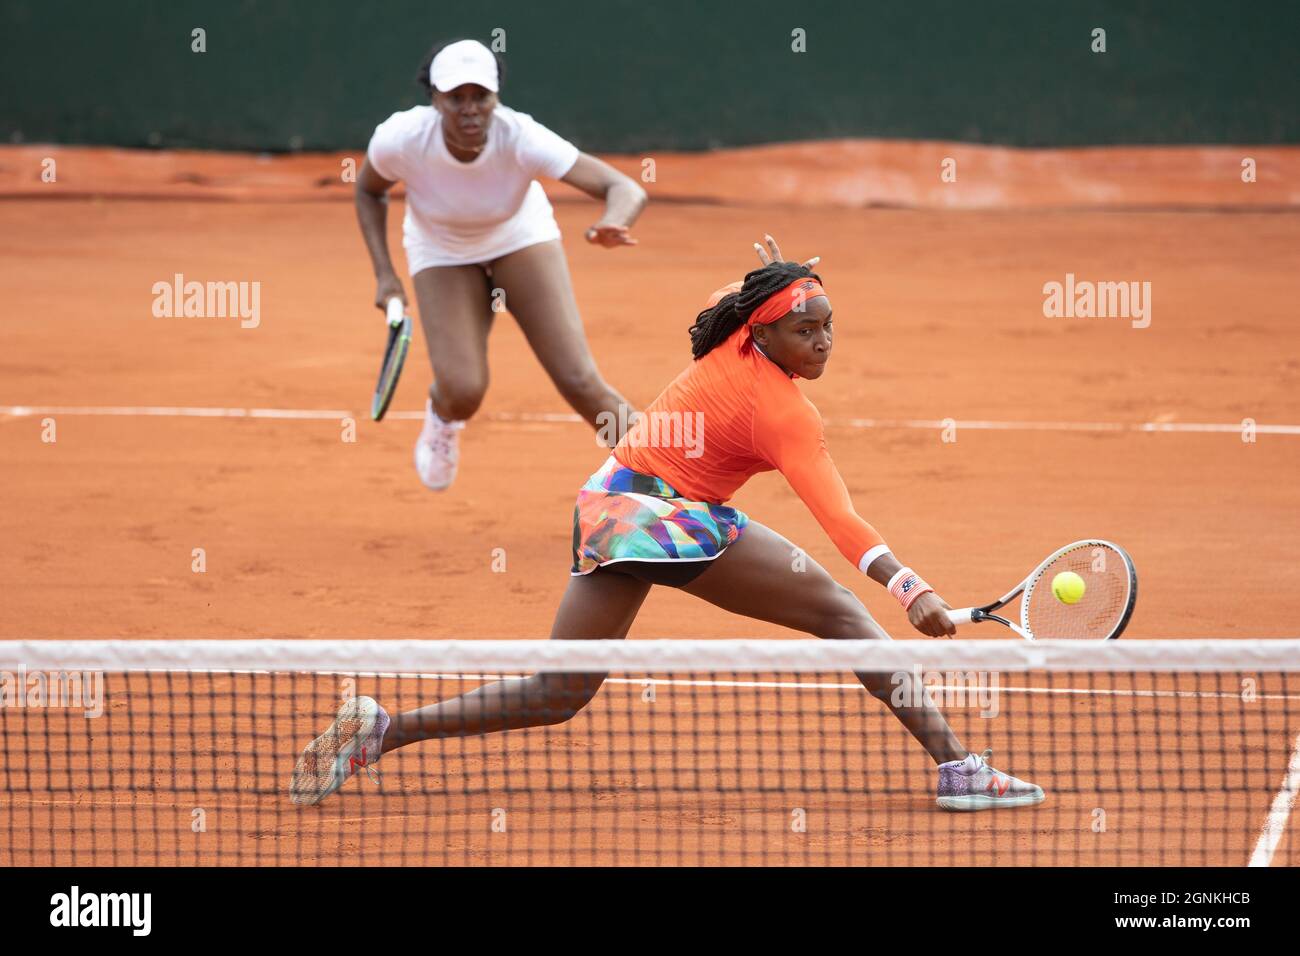 US tennis player Coco Gauff playing a backhand volley shot,French Open 2021 tennis tournament, Paris, France Stock Photo